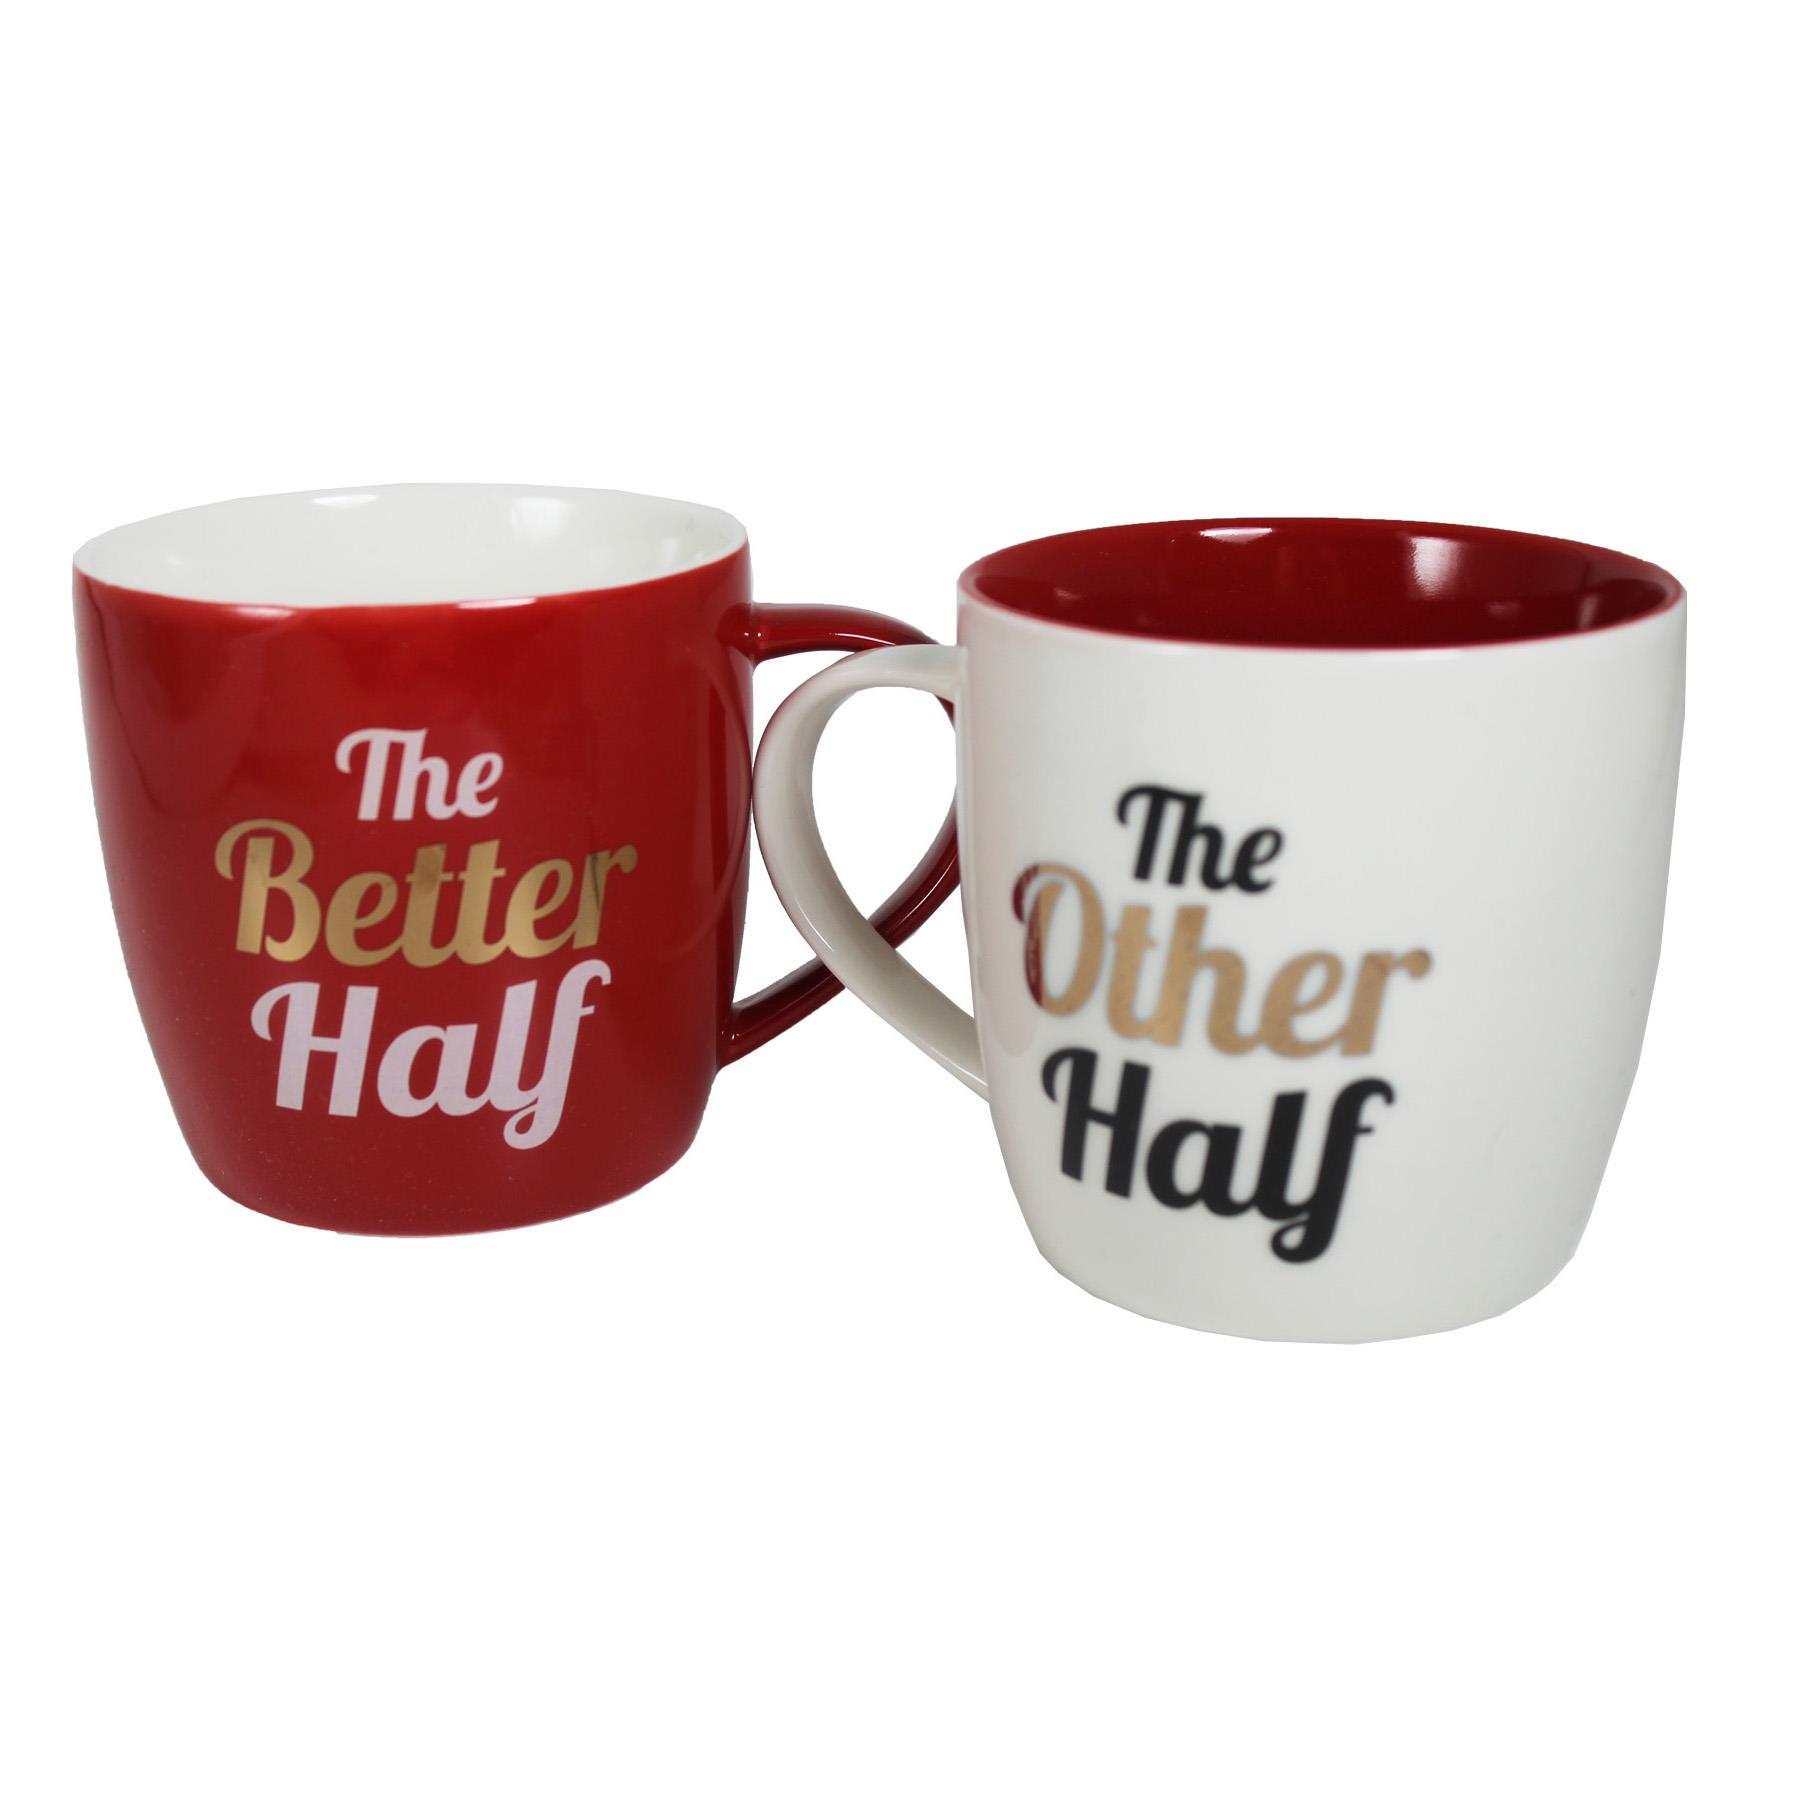 Set of 2 White / Red Mug Set - The Other Half / The Better Half Valentine's Day